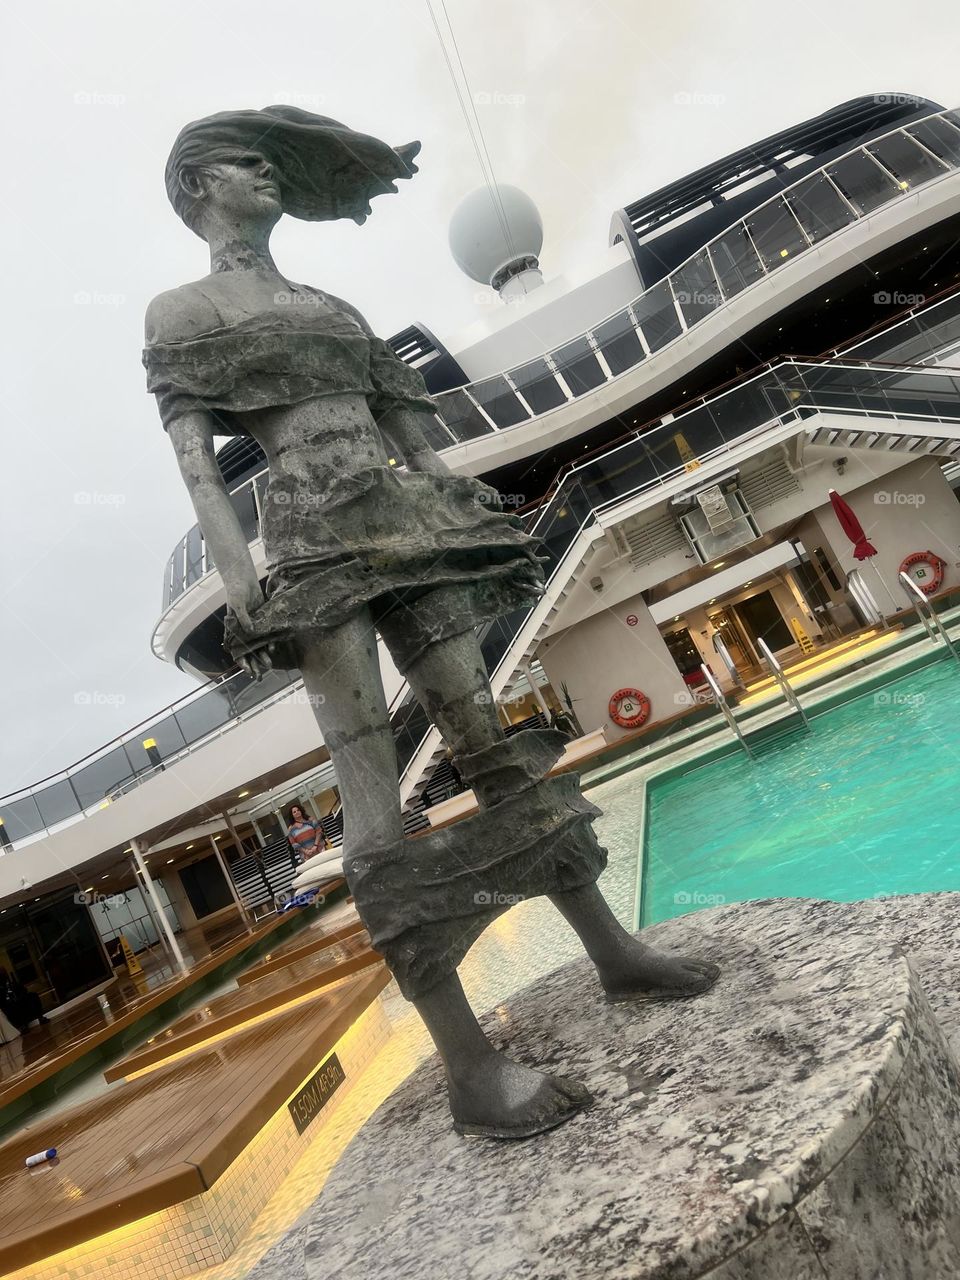 Bronze statue on a cruise ship